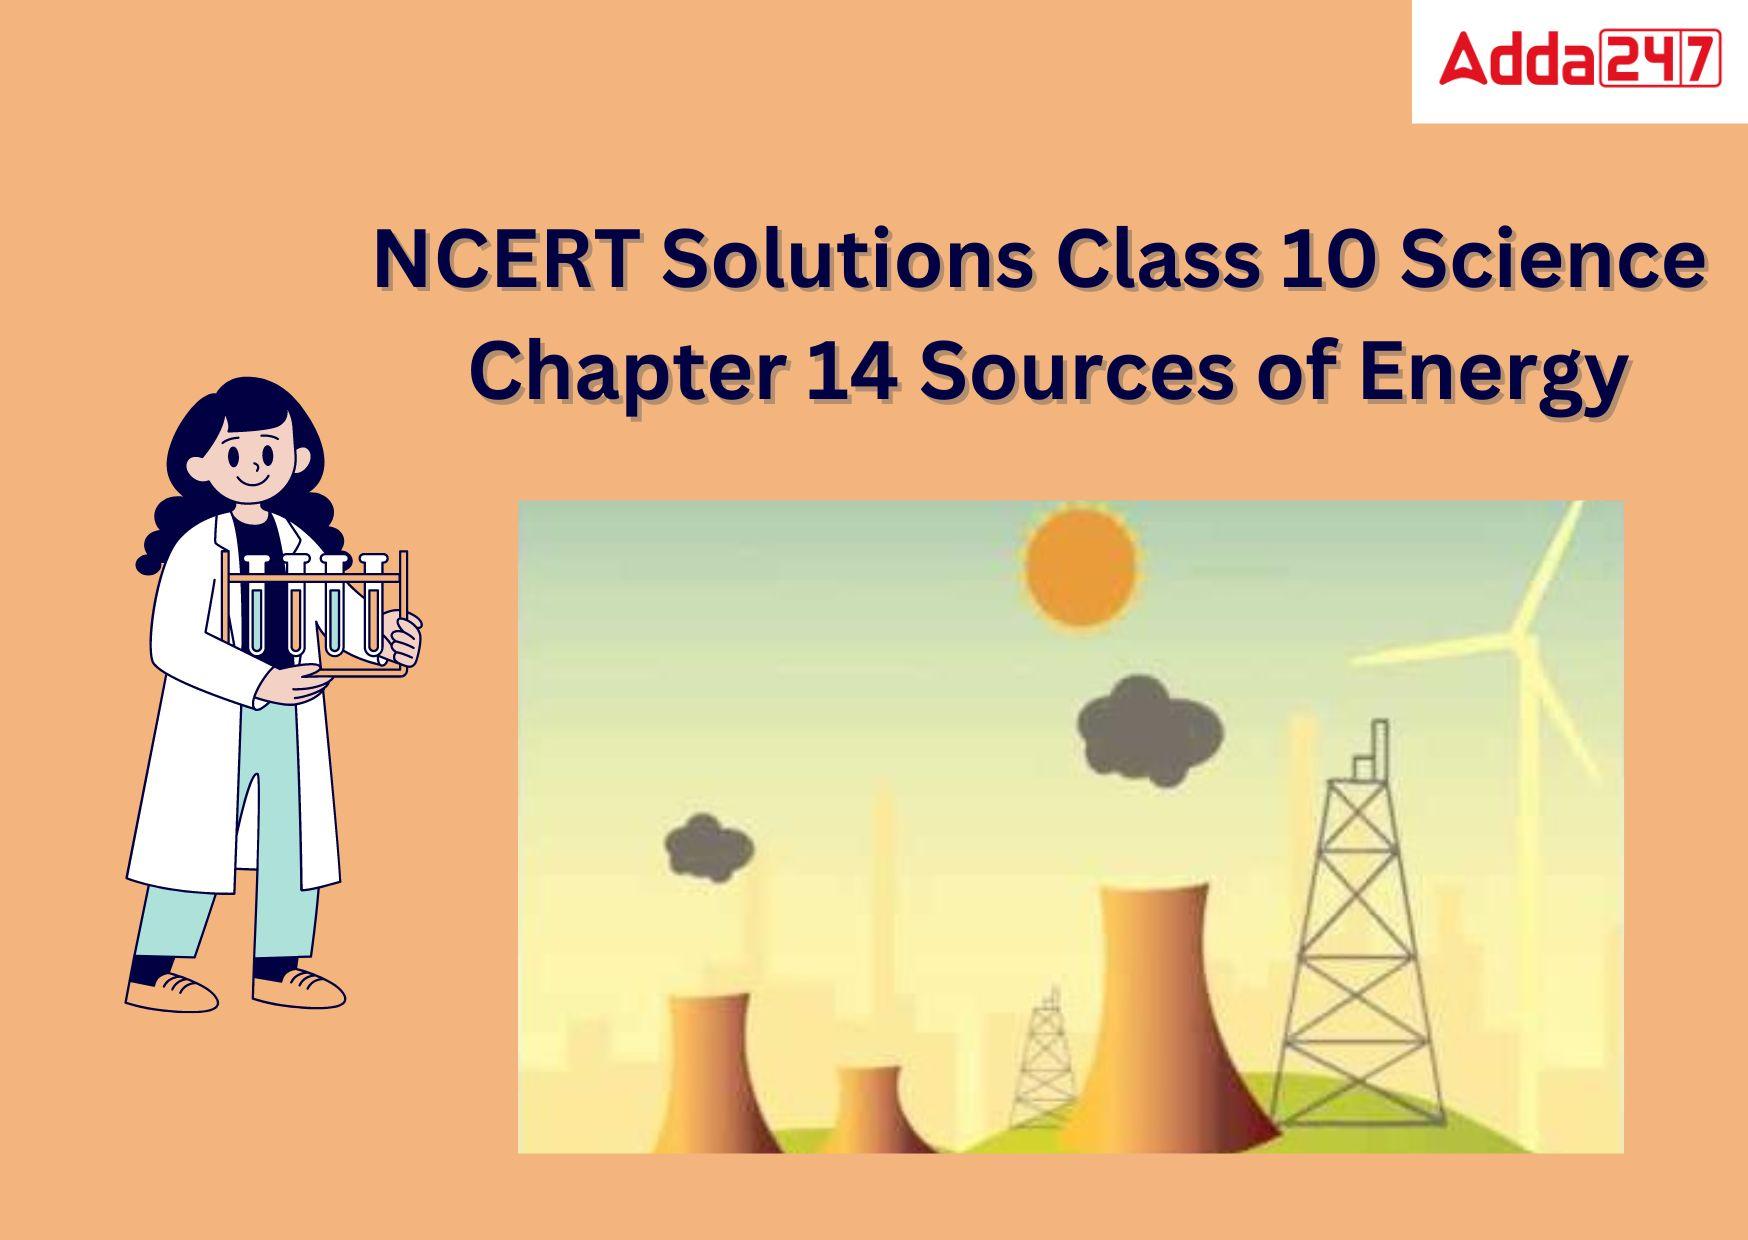 NCERT Solutions Class 10 Science Chapter 14 Sources of Energy